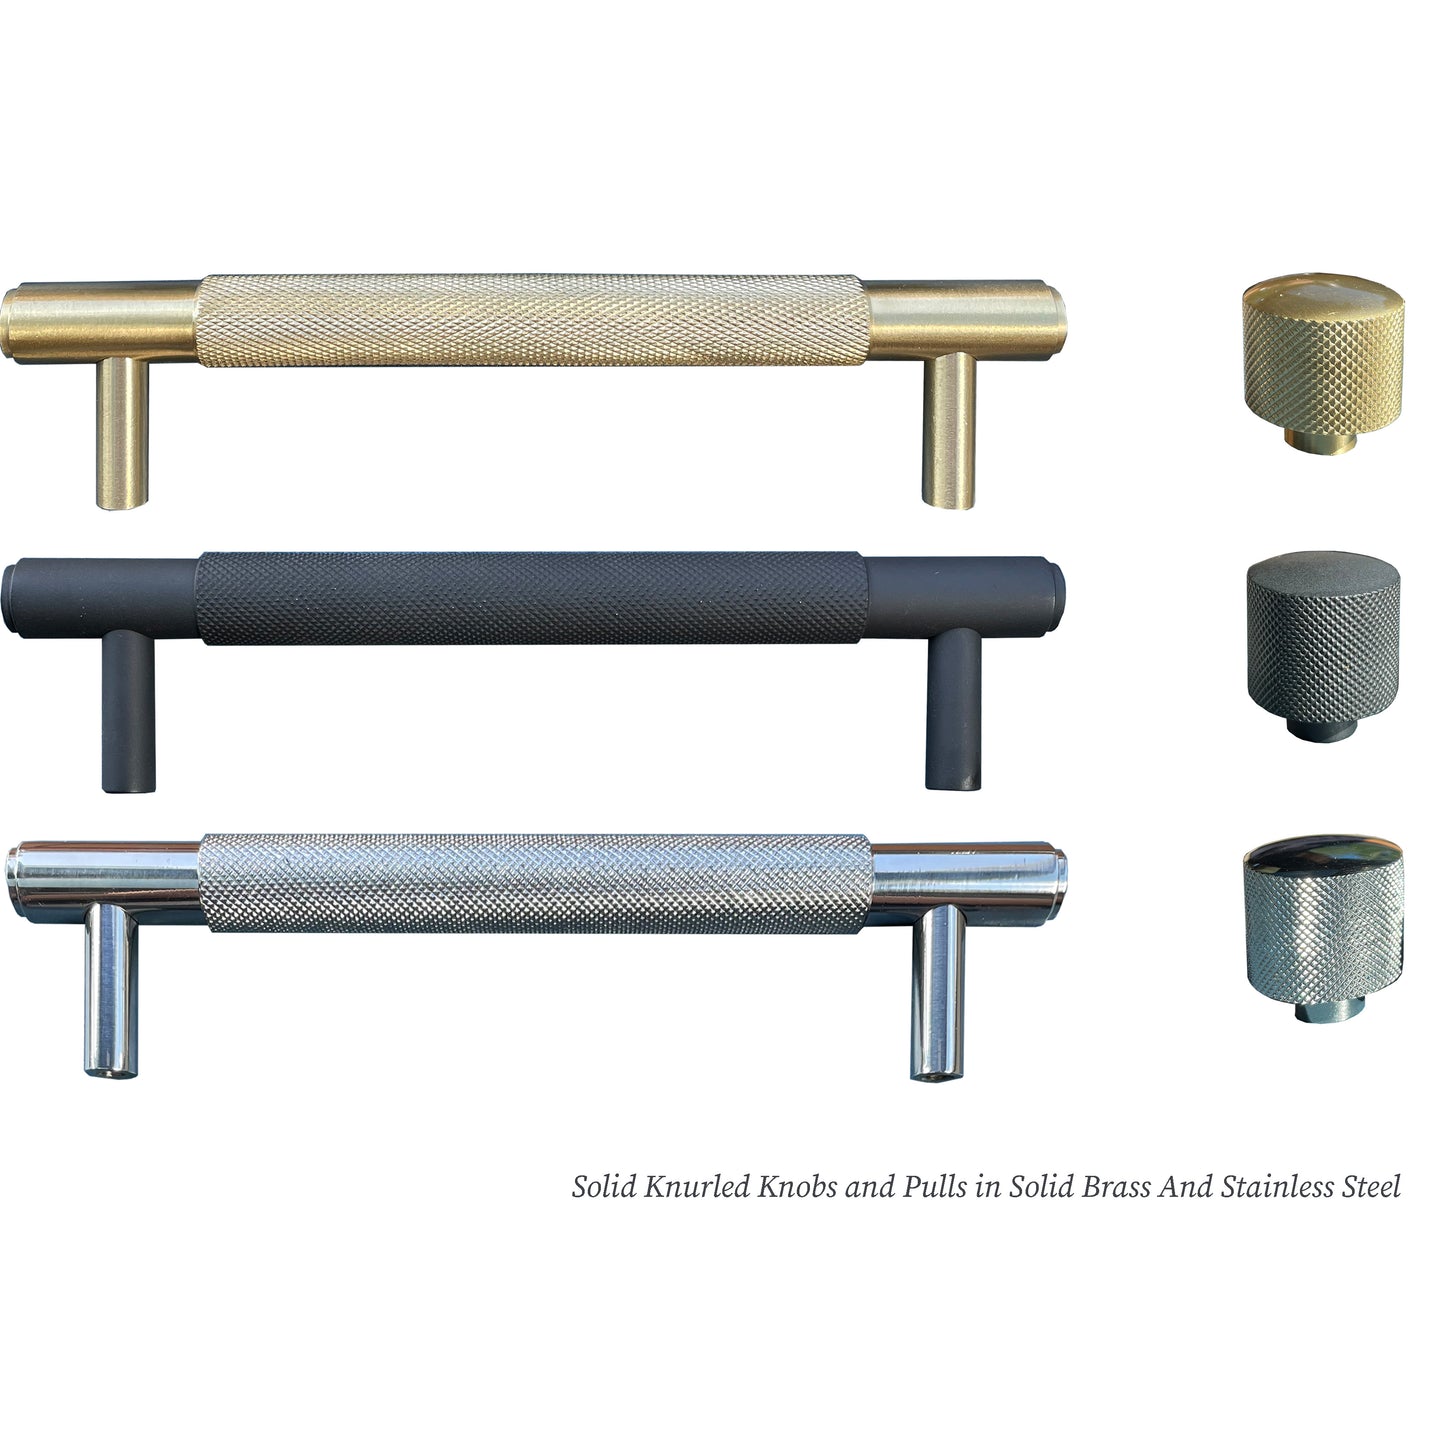 PREMIUM Cabinet Pulls and Knobs with solid wooden backing plate